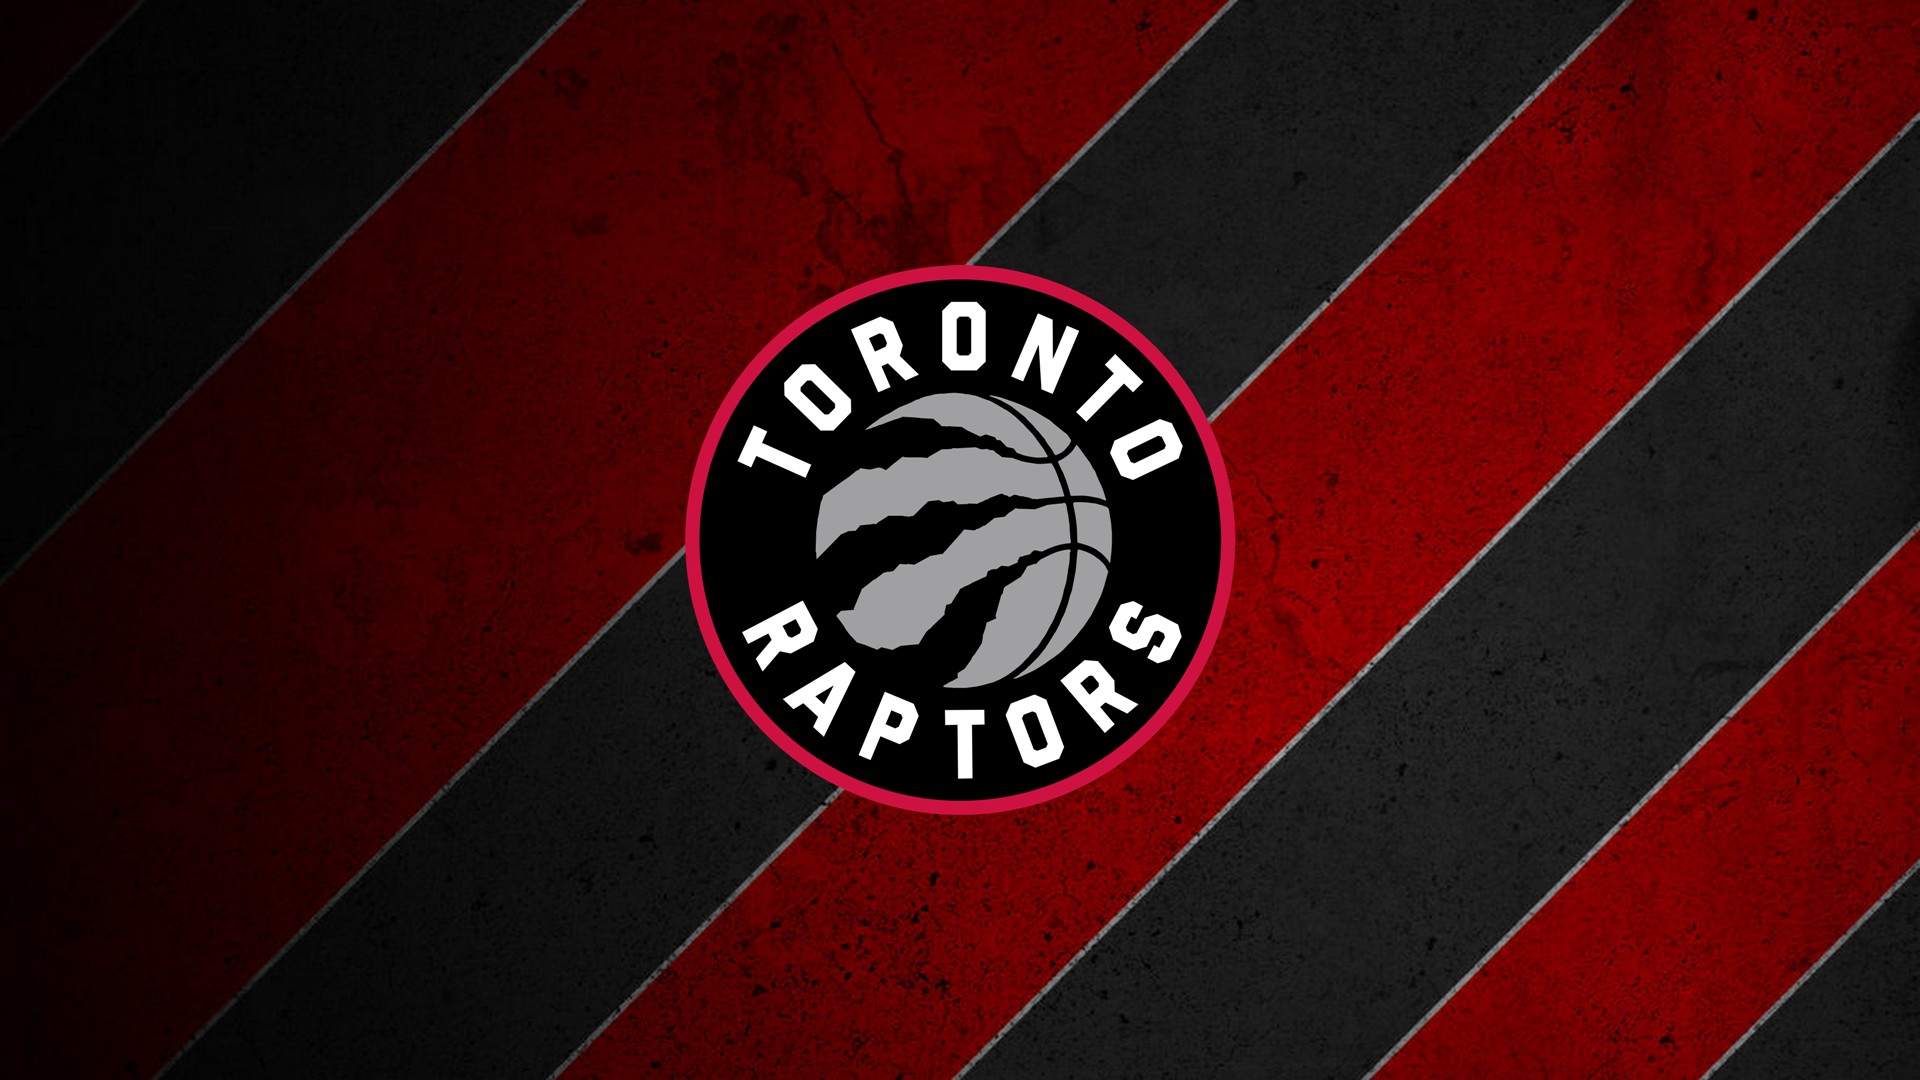 Wallpaper Desktop NBA Raptors HD with image dimensions 1920x1080 pixel. You can make this wallpaper for your Desktop Computer Backgrounds, Windows or Mac Screensavers, iPhone Lock screen, Tablet or Android and another Mobile Phone device